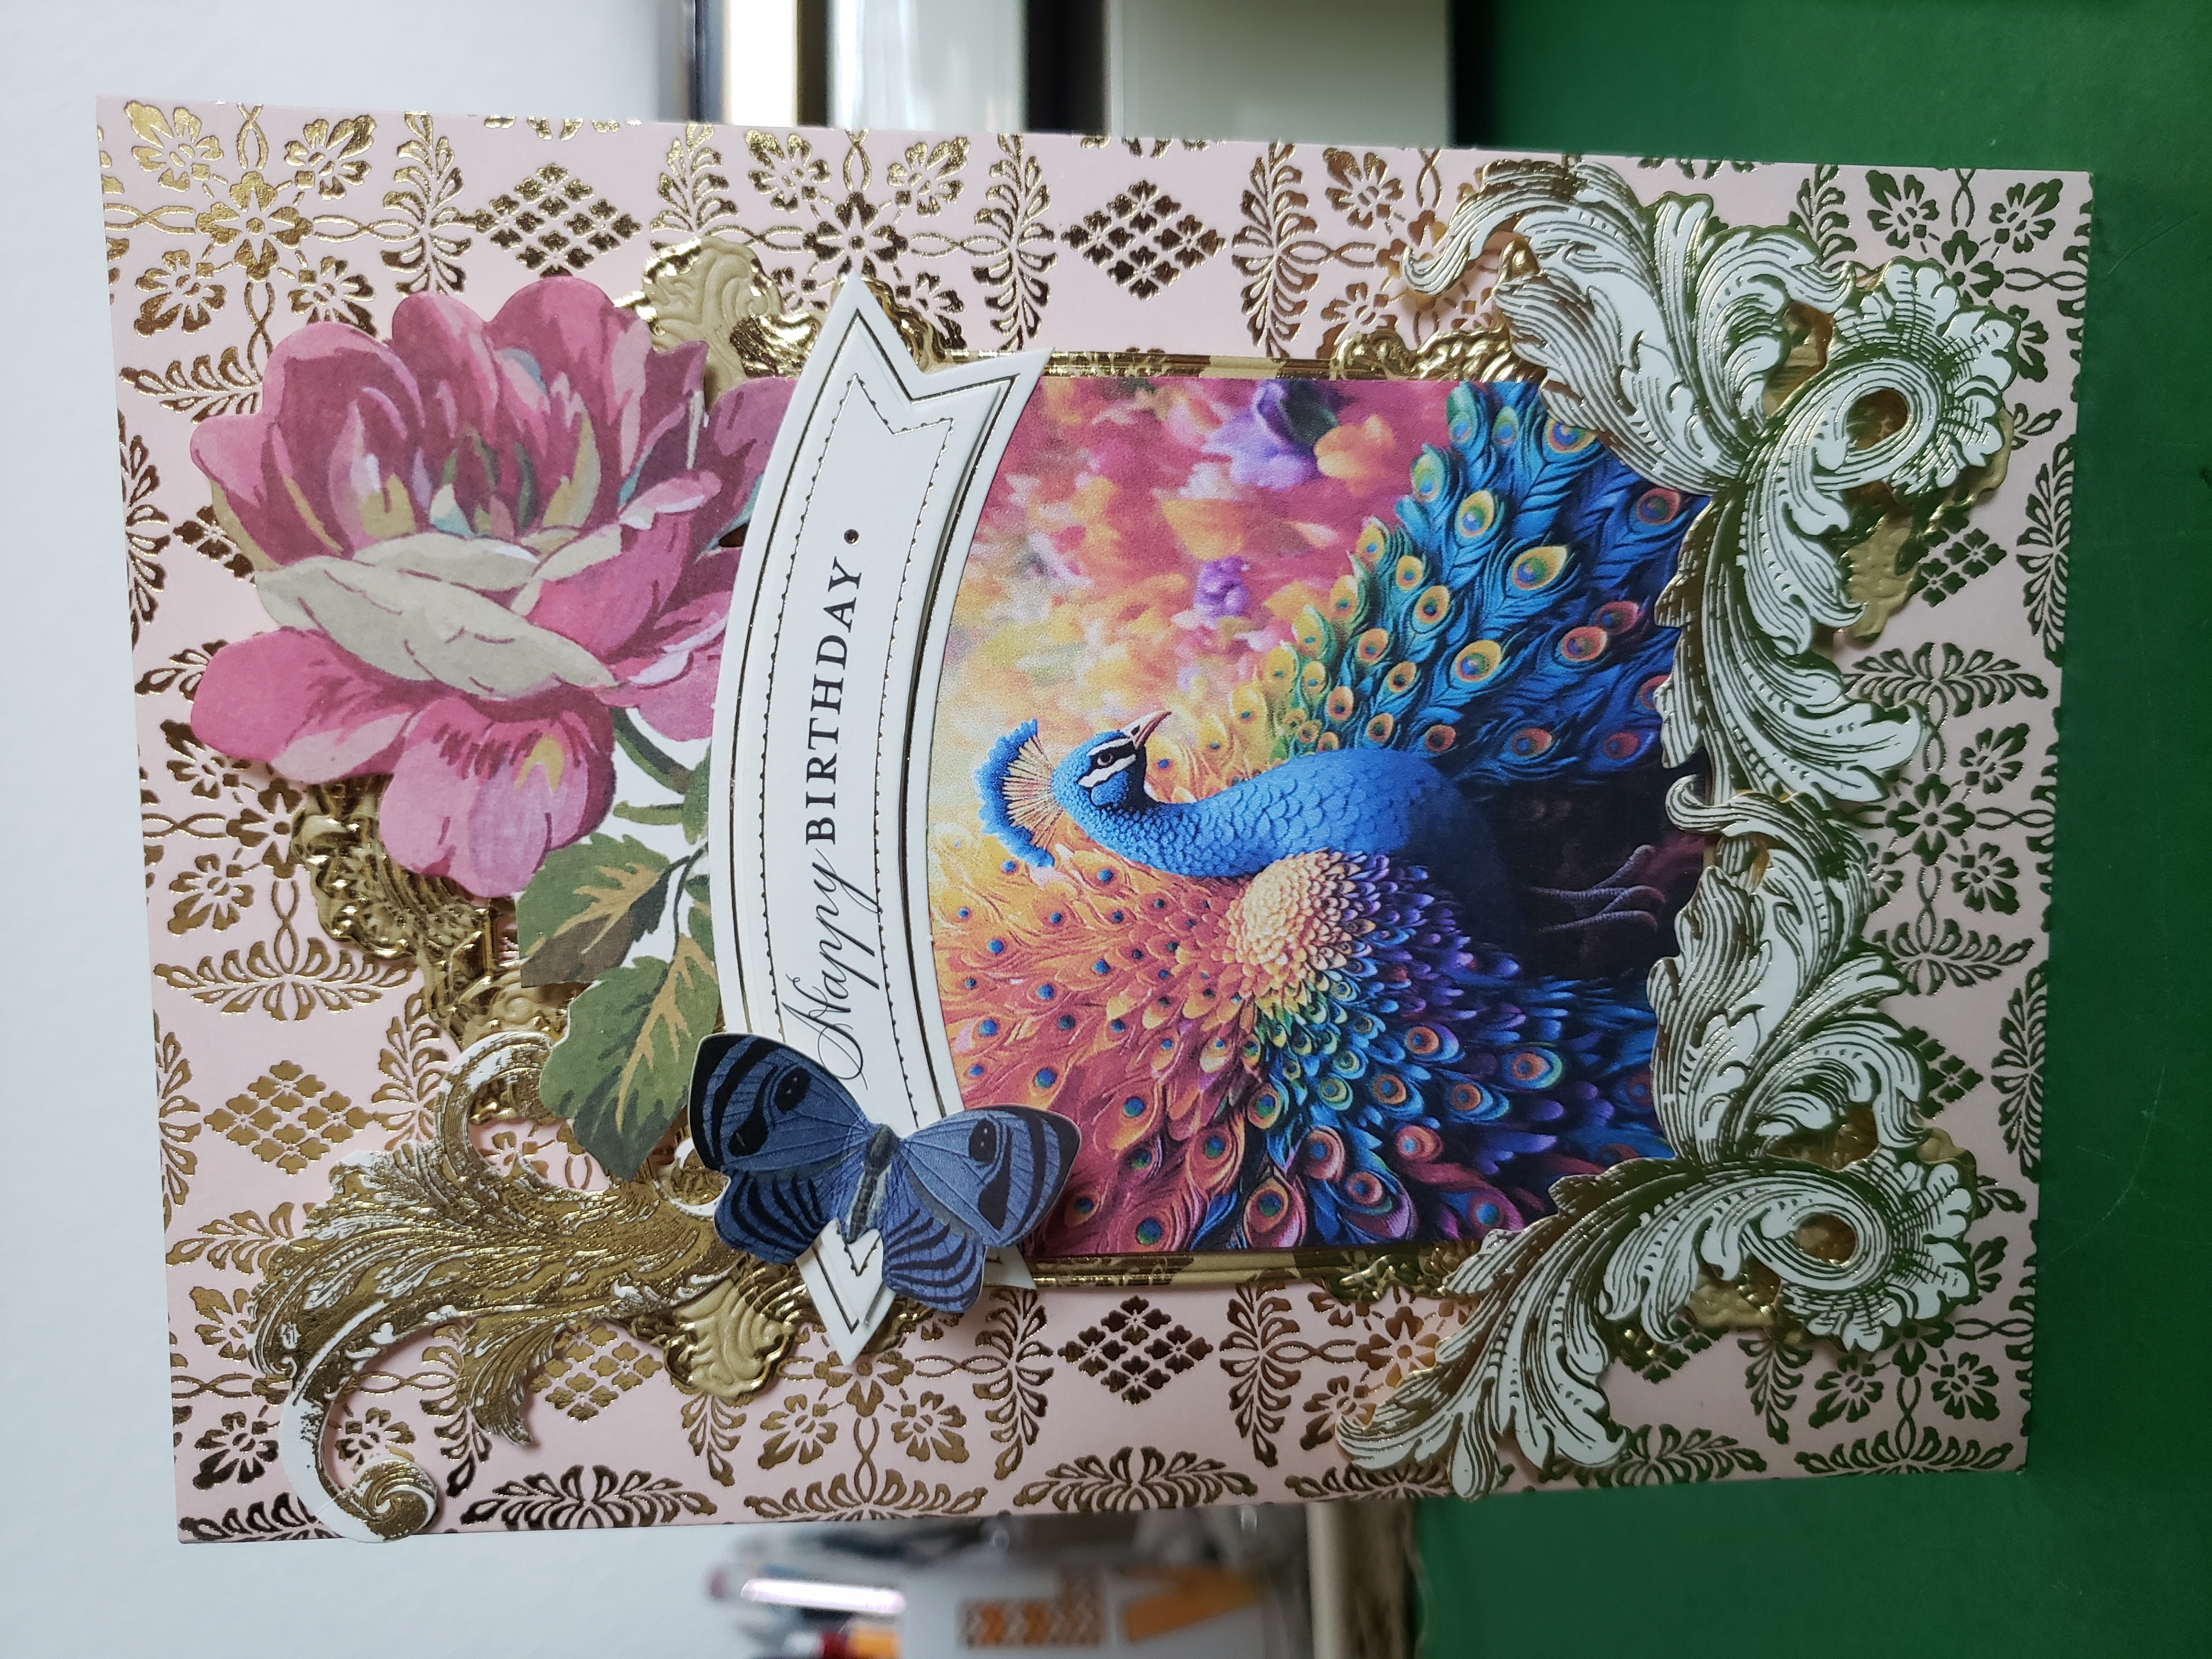 a card with a peacock and flowers on it.